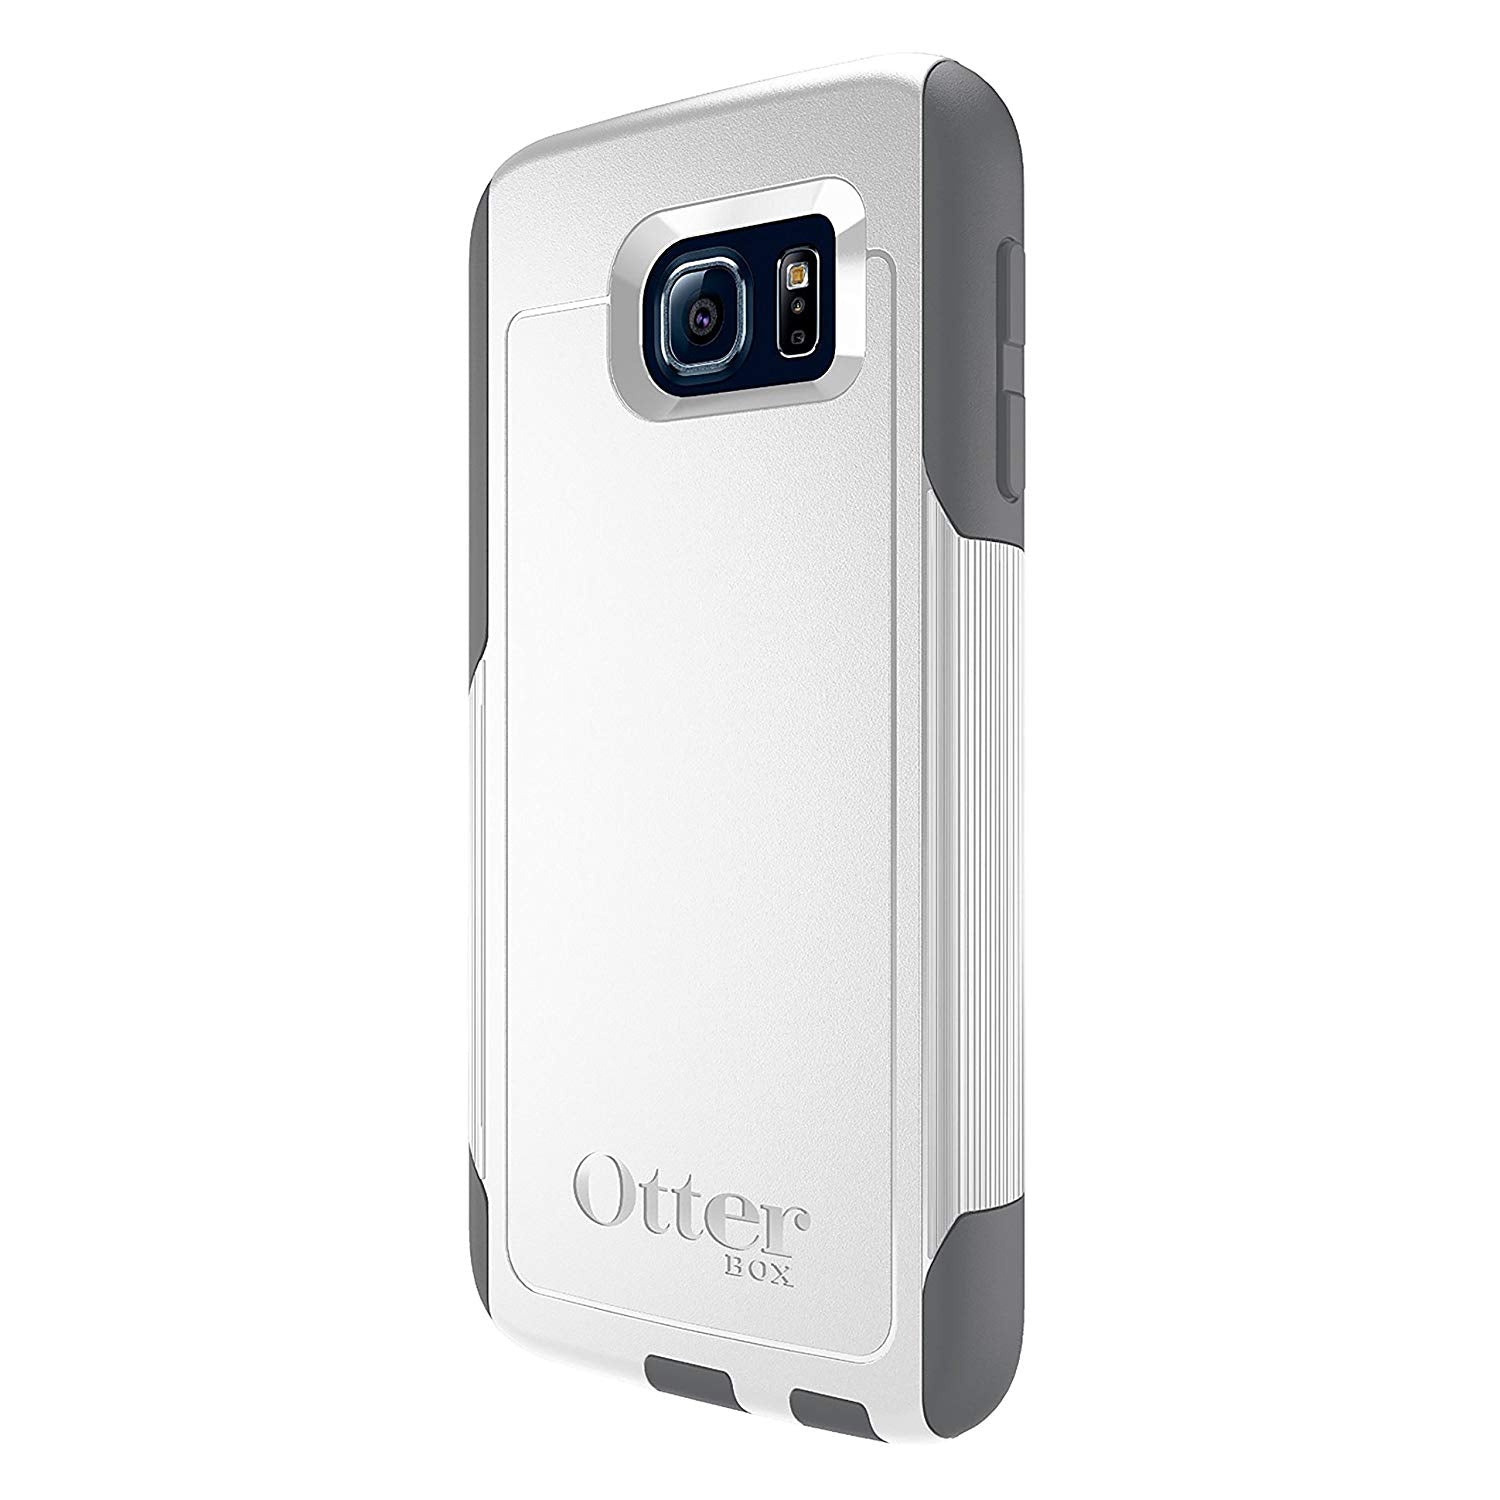 OtterBox COMMUTER SERIES Case for Samsung Galaxy S6 - Glacier (Certified Refurbished)